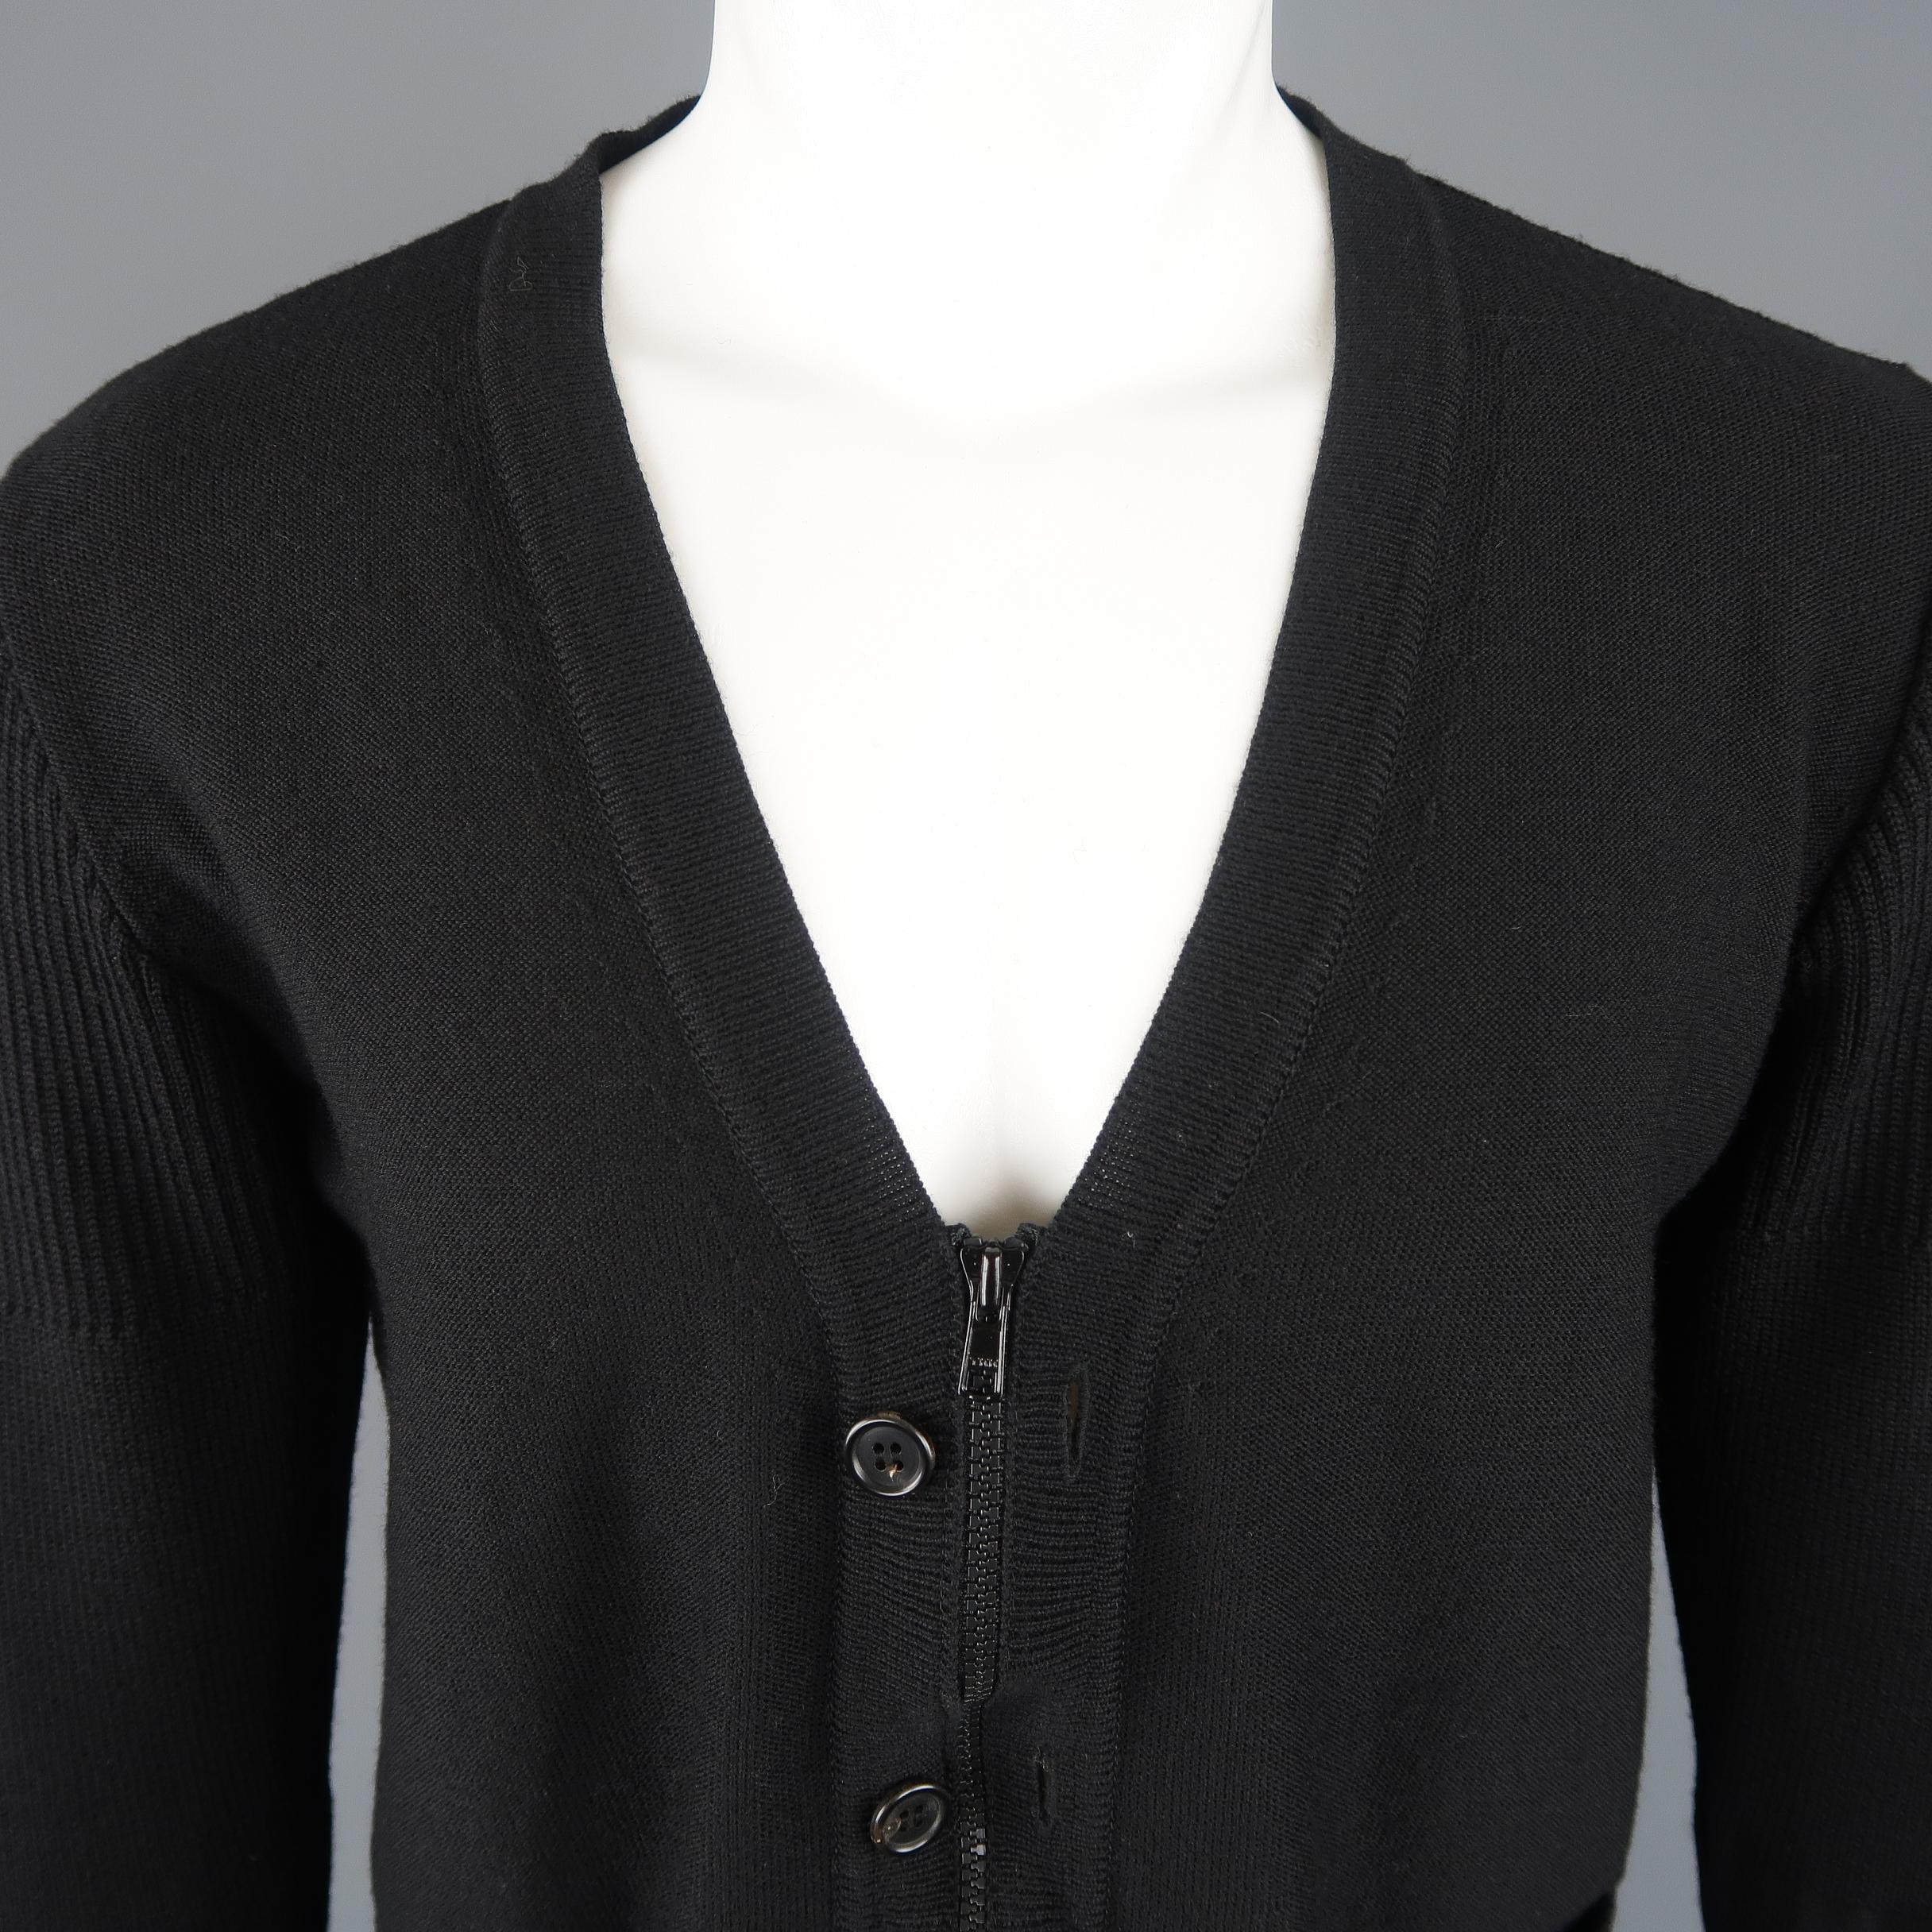 UNDERCOVER cardigan comes in light weight black wool knit with a V neck, pockets, and optional zip or button closure. Made in Japan.
 
Excellent Pre-Owned Condition.
Marked: JP 3
 
Measurements:
 
Shoulder: 16 in.
Chest: 44 in.
Sleeve: 25